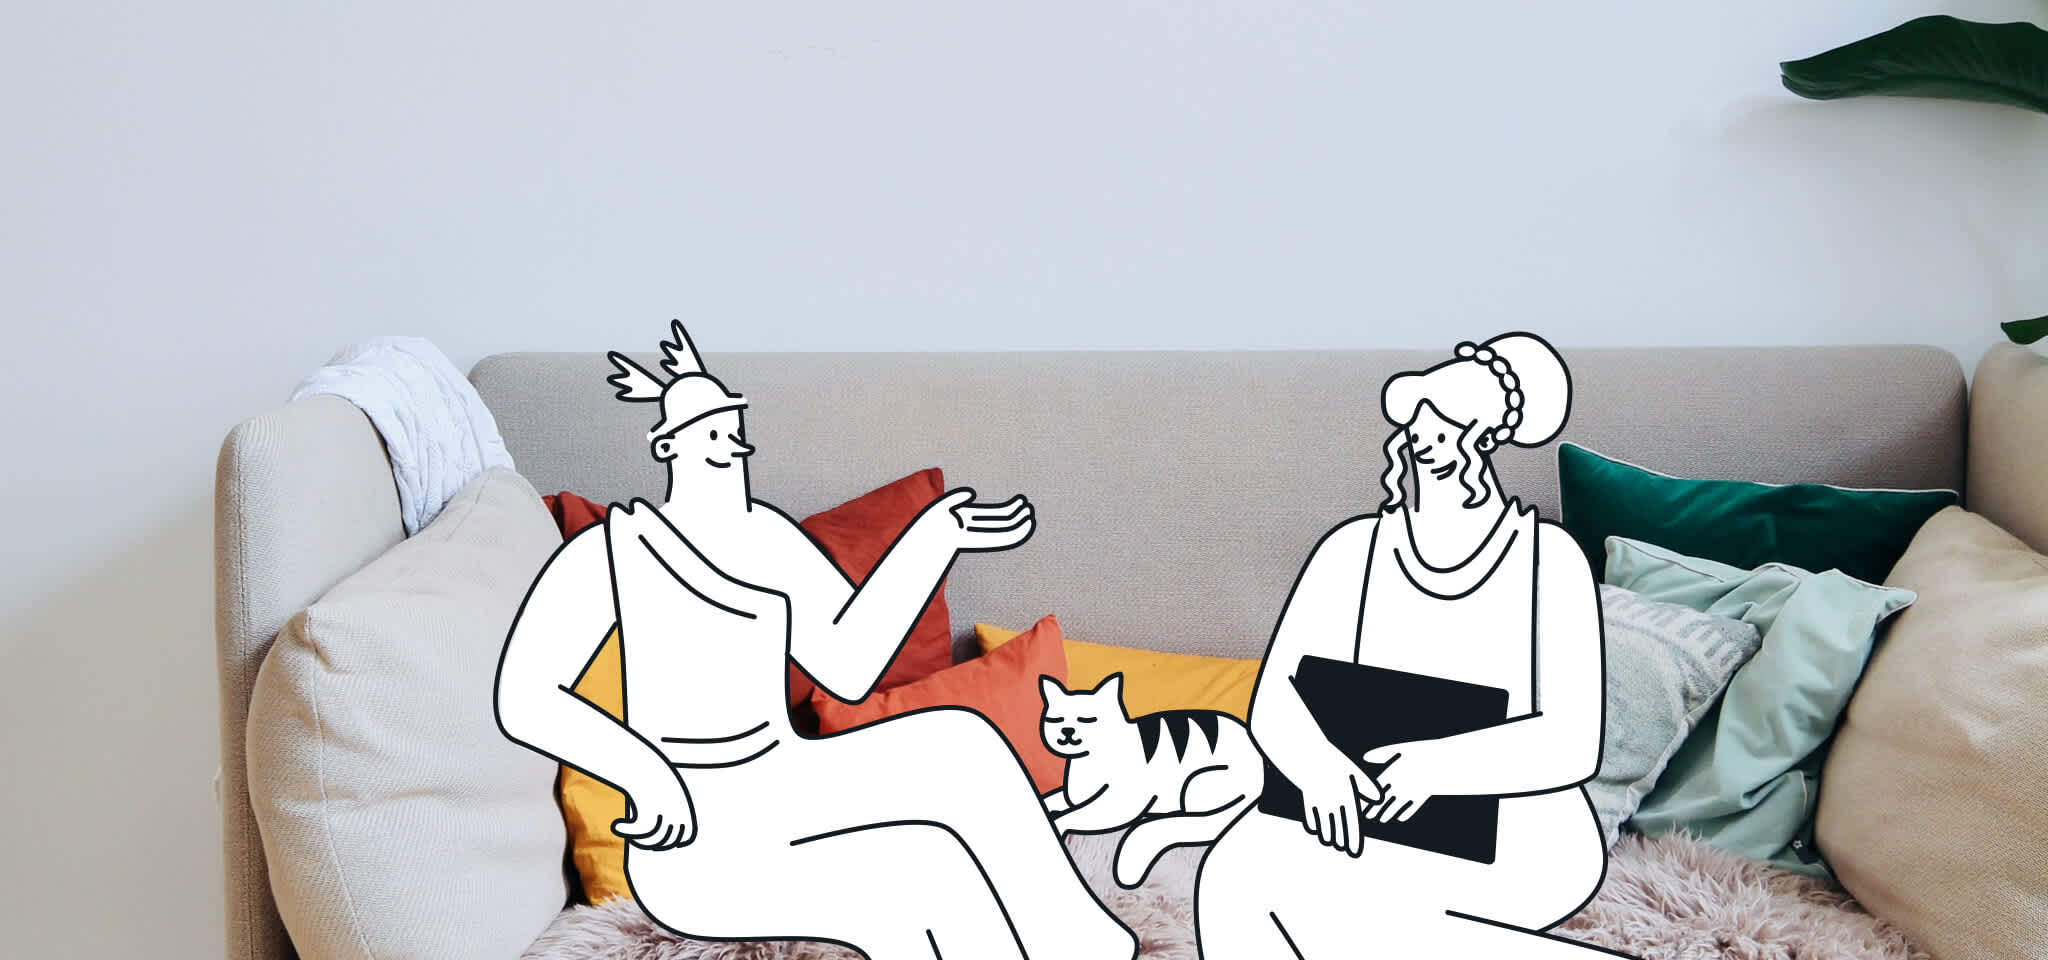 Hera and Hermes sitting on a sofa with a cat